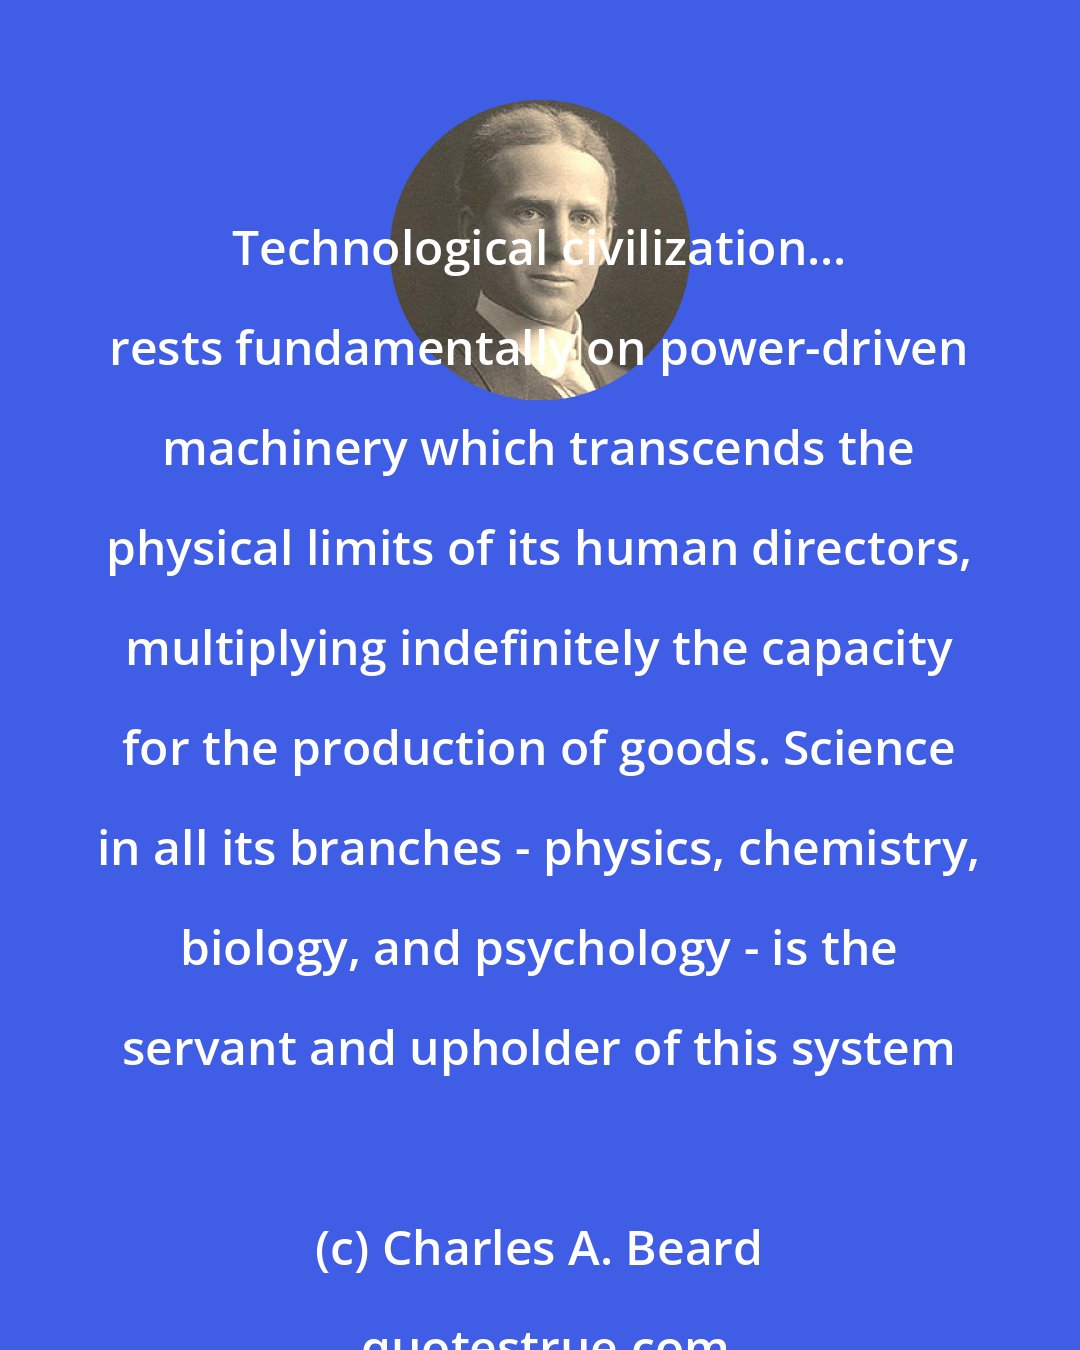 Charles A. Beard: Technological civilization... rests fundamentally on power-driven machinery which transcends the physical limits of its human directors, multiplying indefinitely the capacity for the production of goods. Science in all its branches - physics, chemistry, biology, and psychology - is the servant and upholder of this system